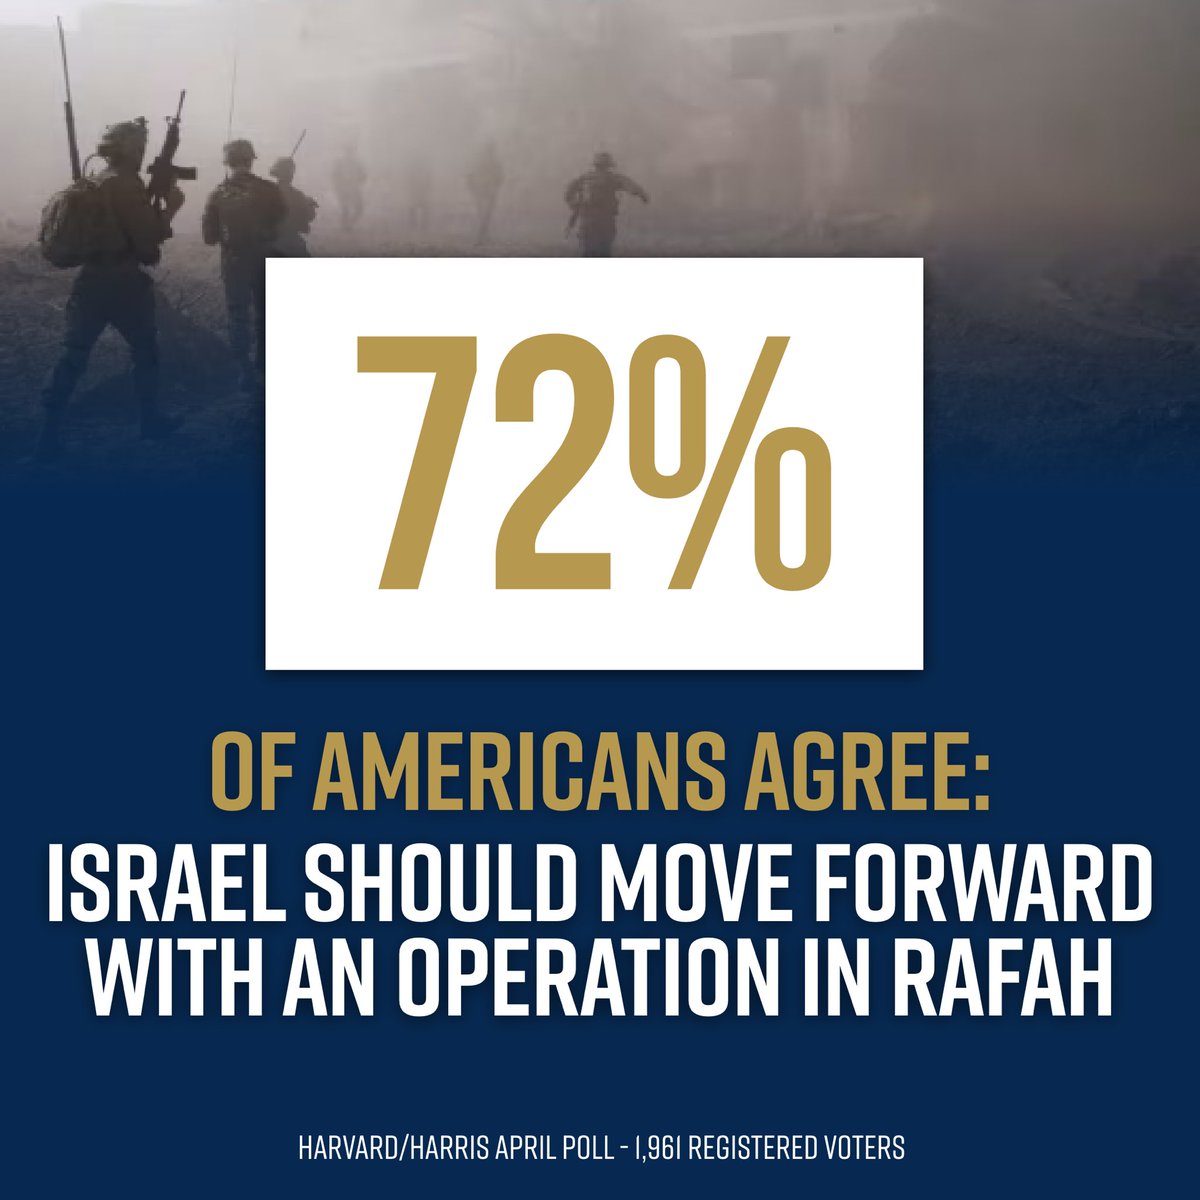 Americans support an Israeli operation in Rafah to destroy Hamas.

#StandwithIsrael
#FreeTheHostages